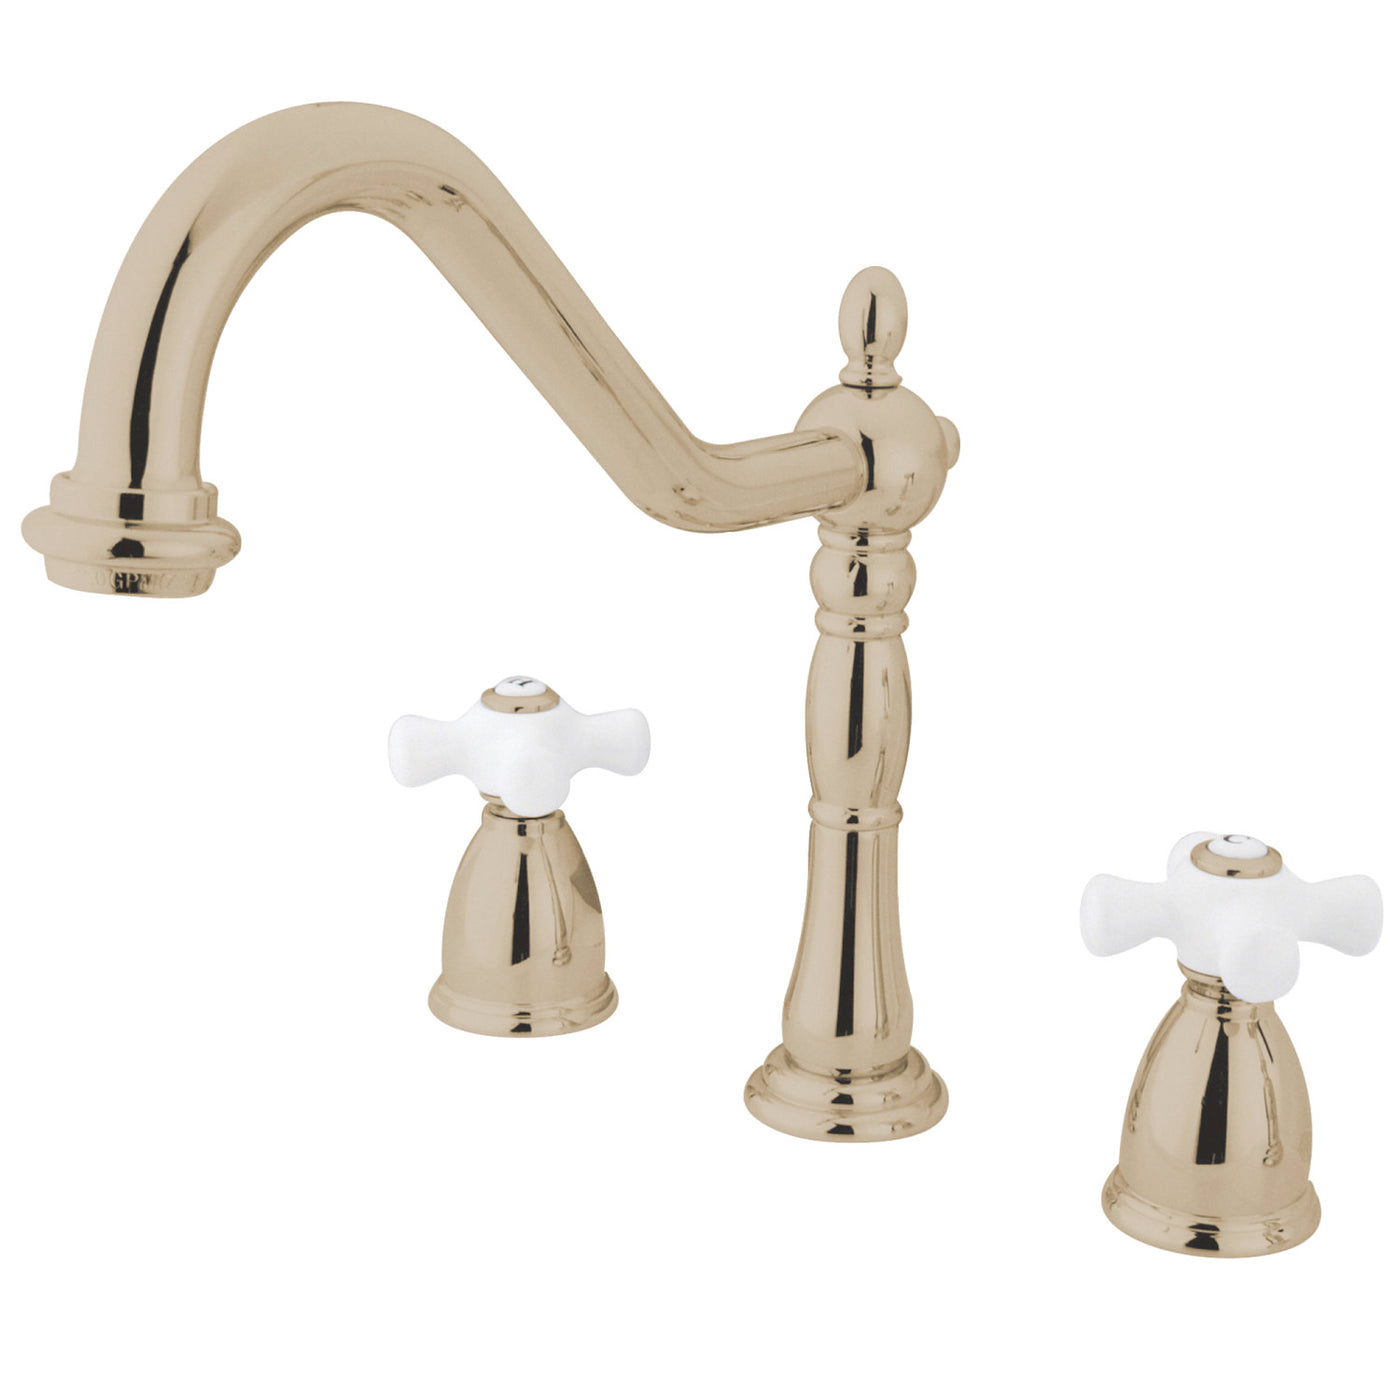 Elements of Design EB1796PXLS Widespread Kitchen Faucet, Polished Nickel